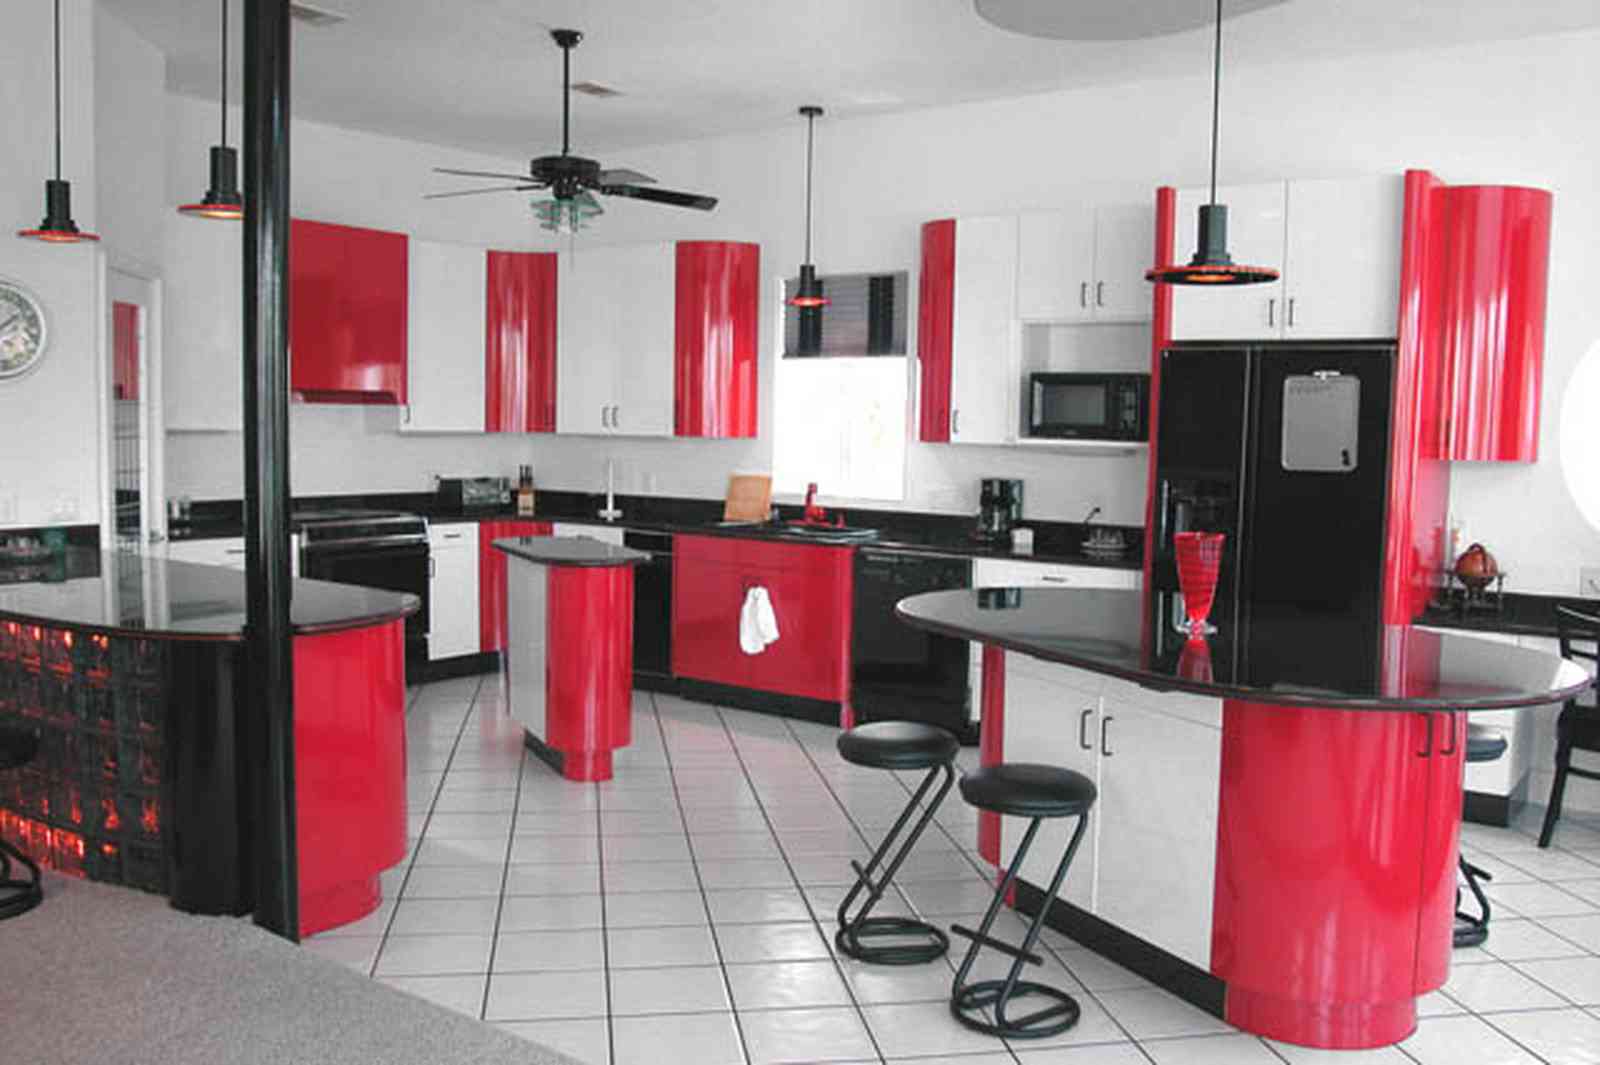 Navarre:-7332-Grand-Navarre-Blvd_21.jpg:  red lacquer cabinets, red and black, art deco decor, art deco house, kitchen, red kitchen cabinets, glass brick bar, ceiling fan, black laquer cabinets